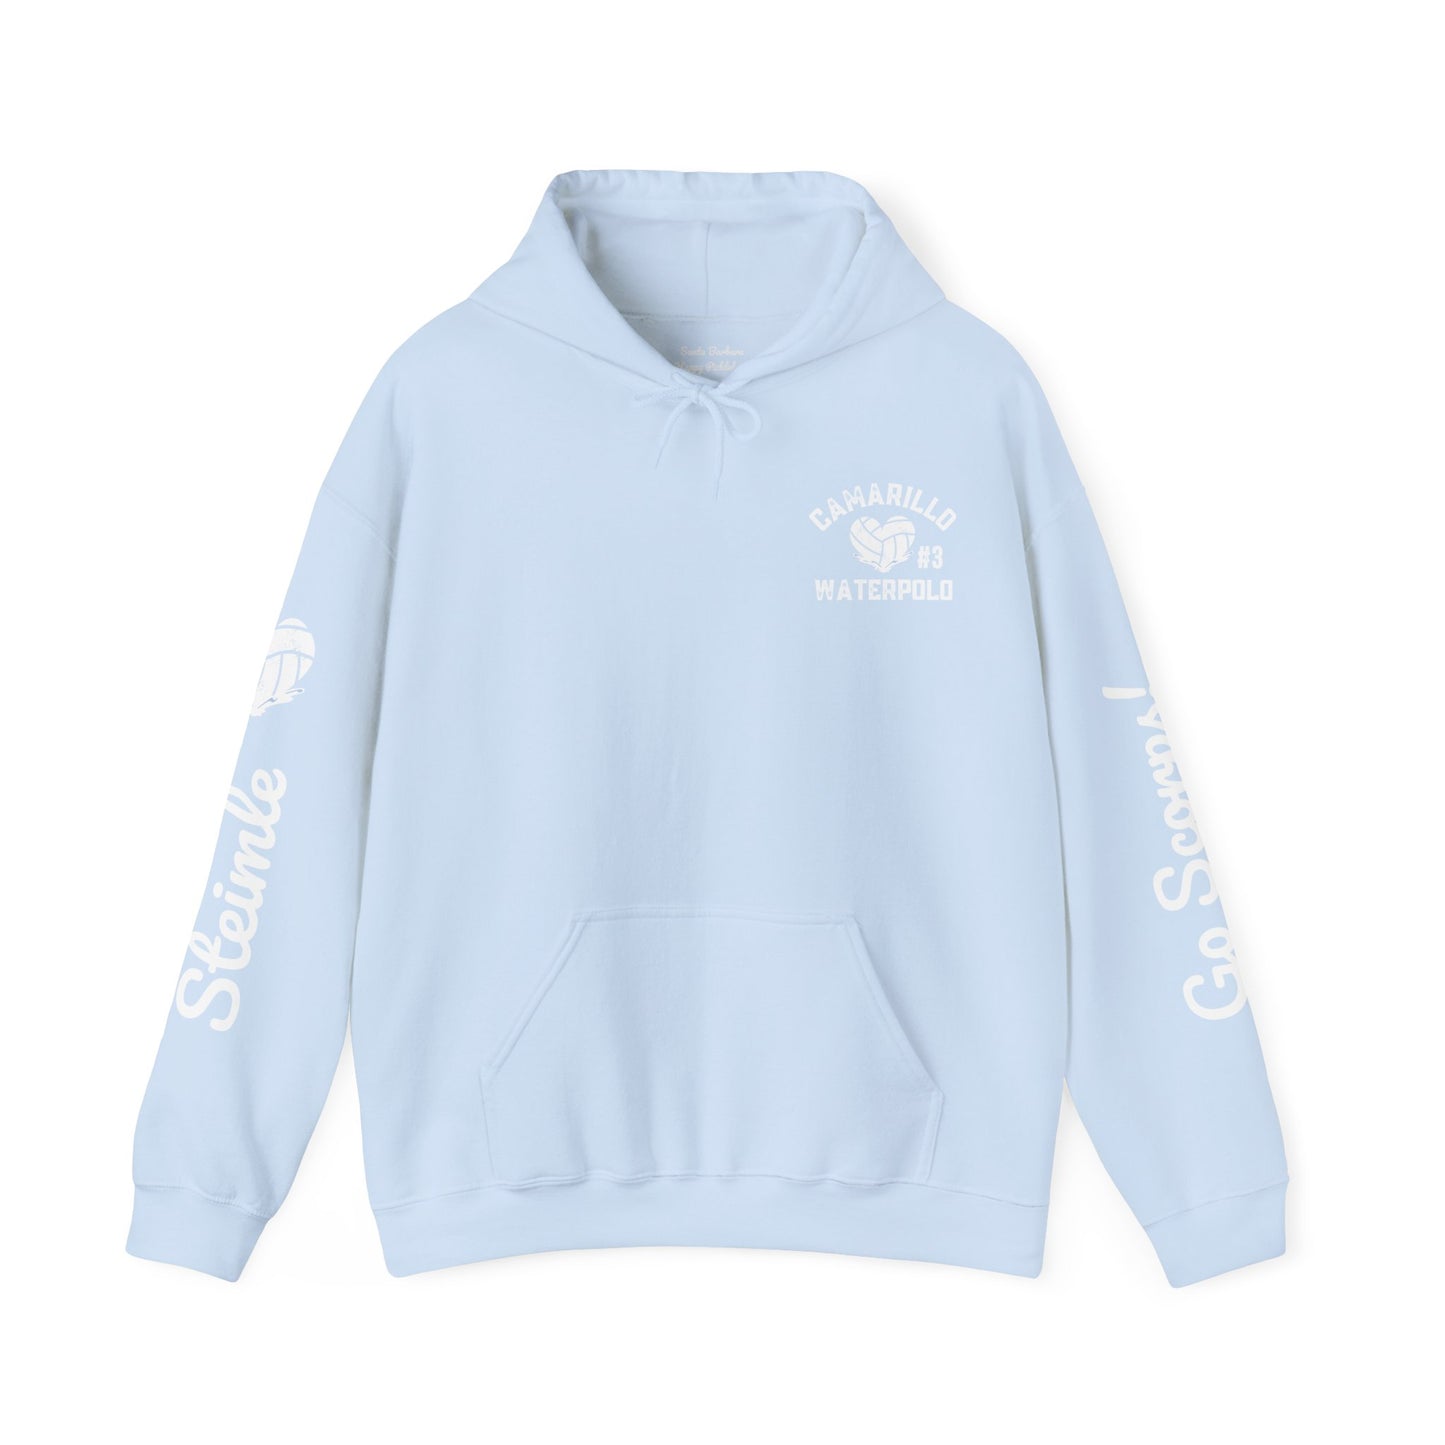 Nannette Camarillo Waterpolo Hoodies - CUSTOMIZE any side - put in the notes of order